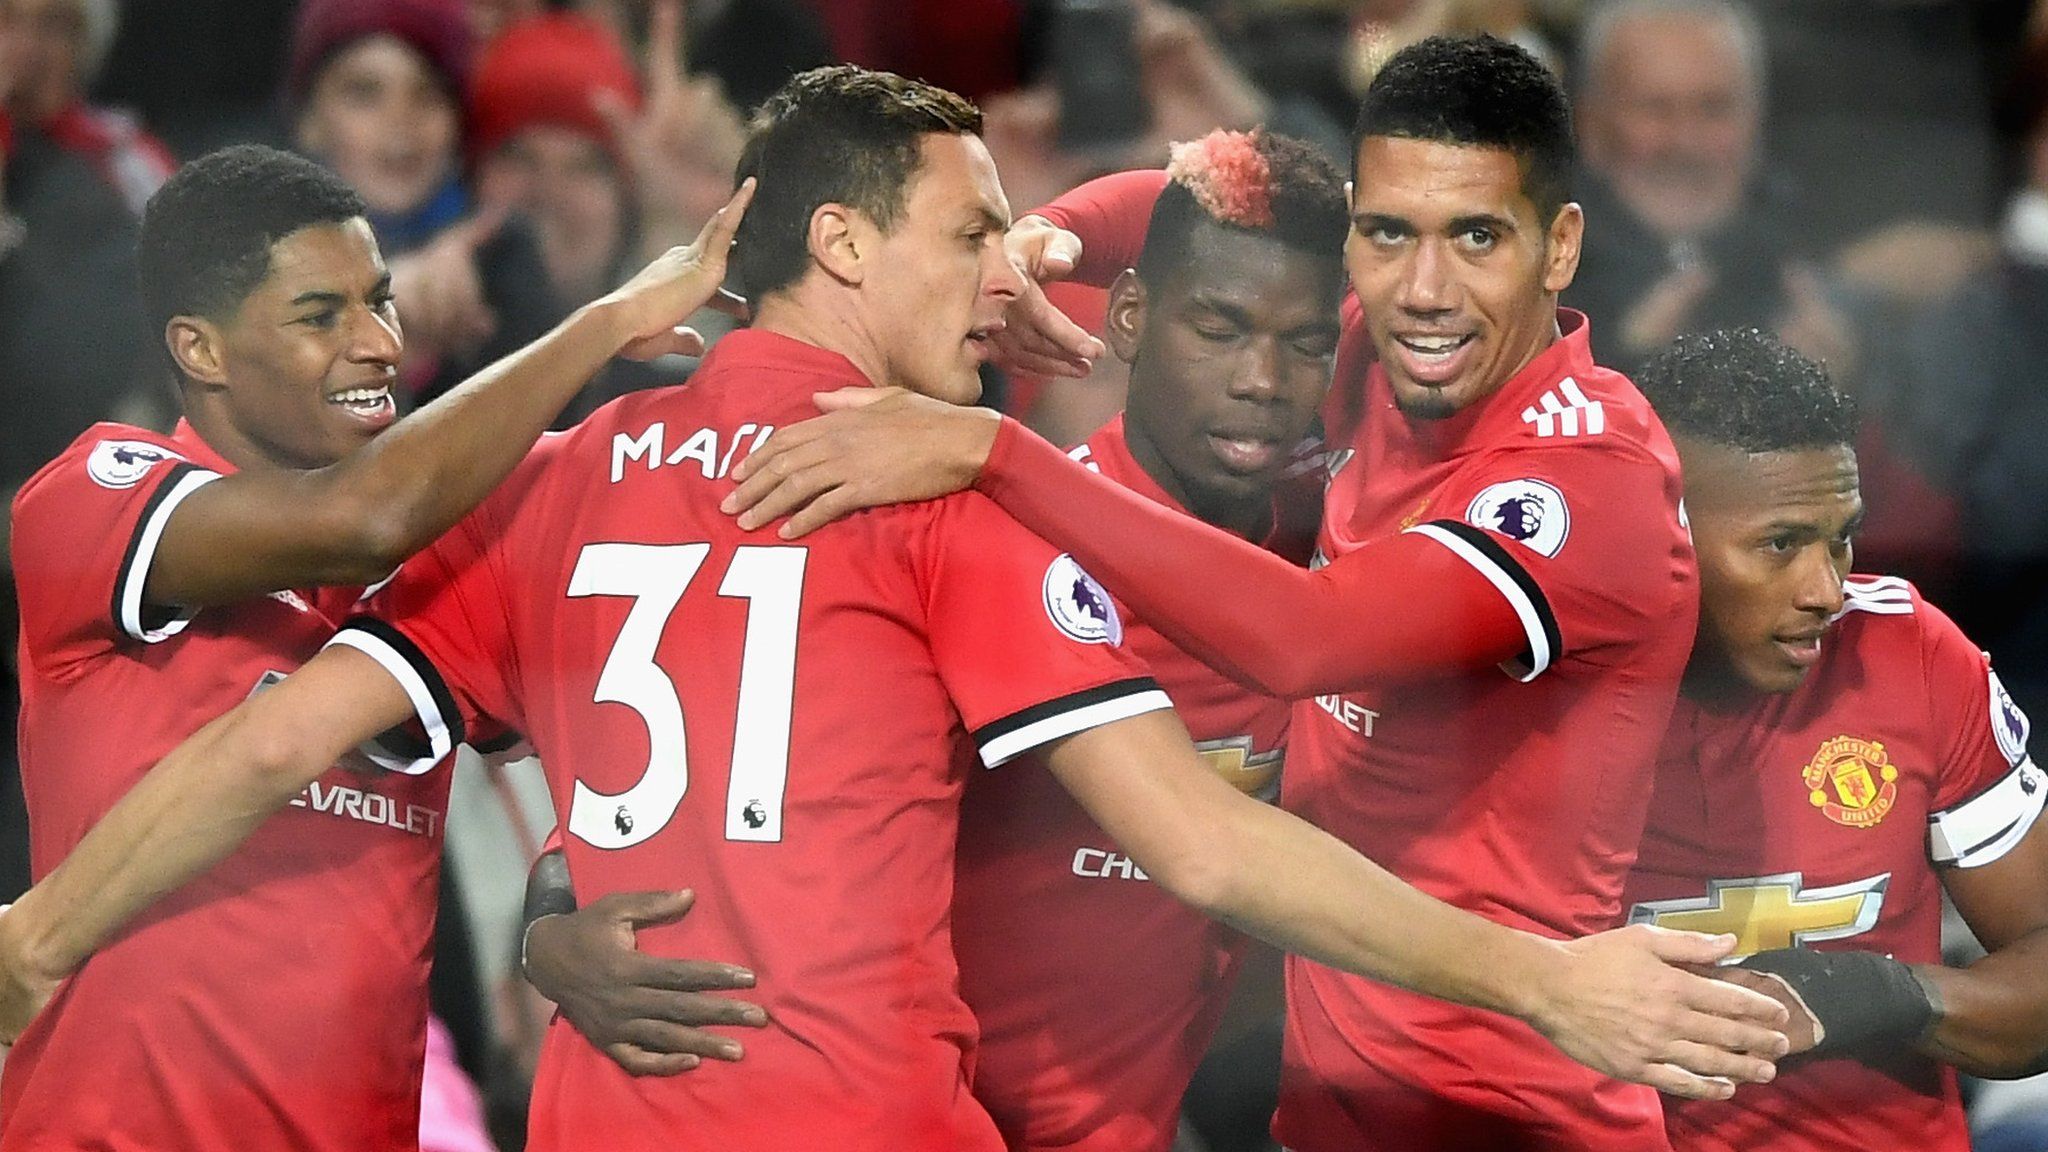 Manchester United's players celebrate scoring against Newcastle United